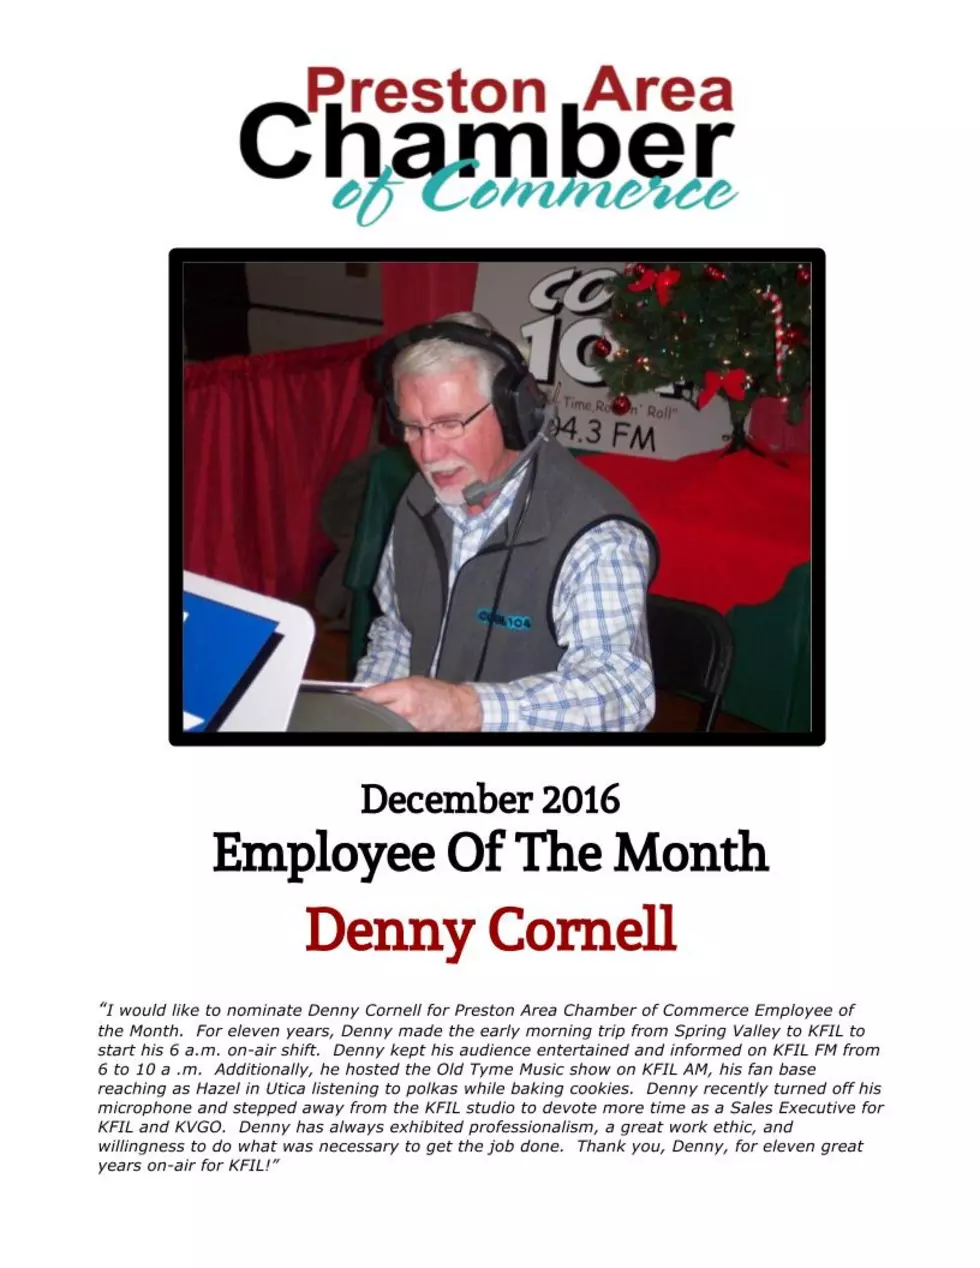 KFIL’s Denny Cornell is Preston Area Chamber’s Employee of the Month